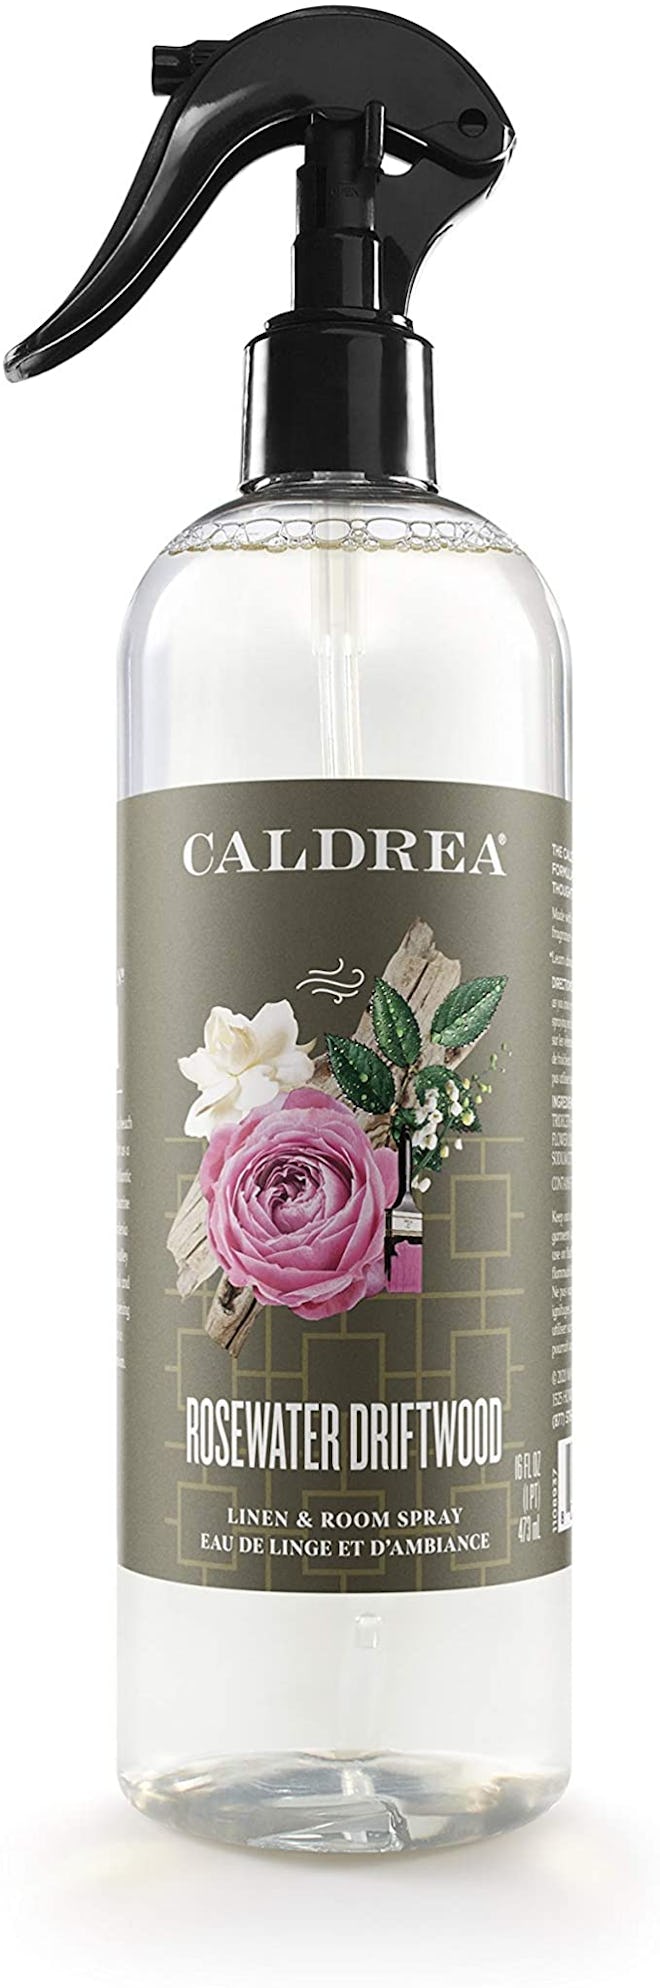 Caldrea Rosewater Driftwood Linen And Room Spray, 16 Oz